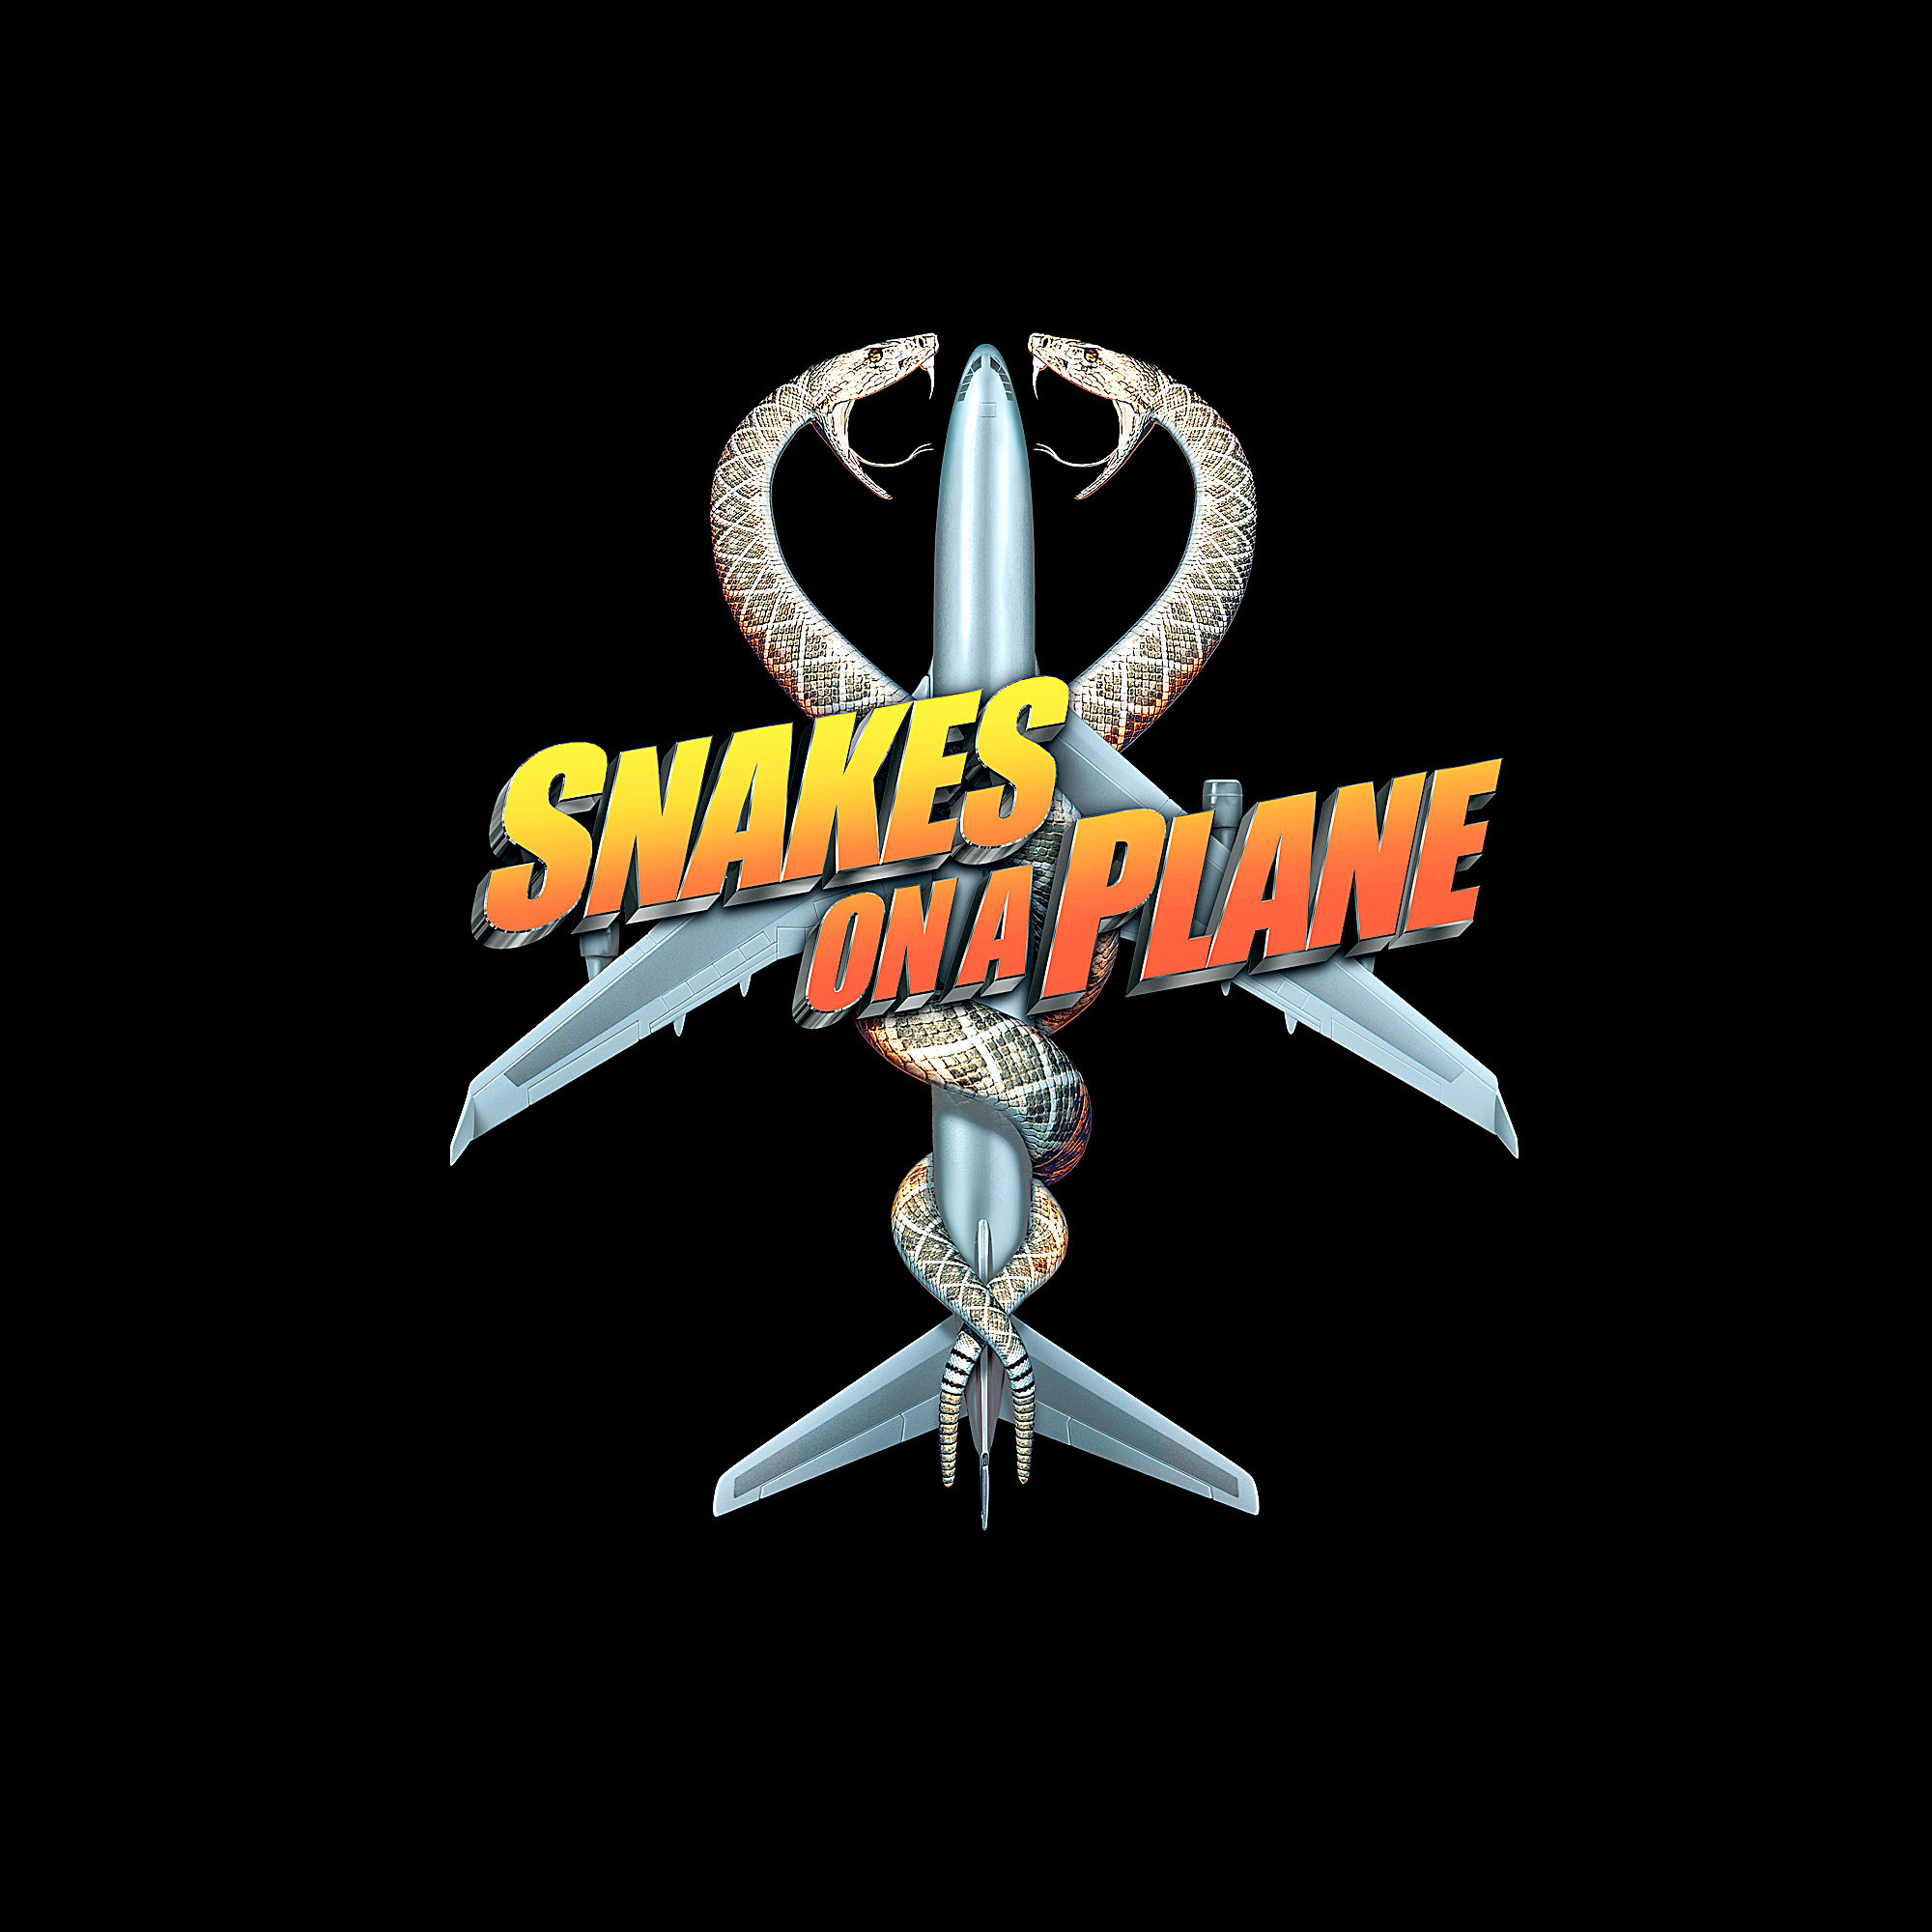 two snakes wrapped around a plane